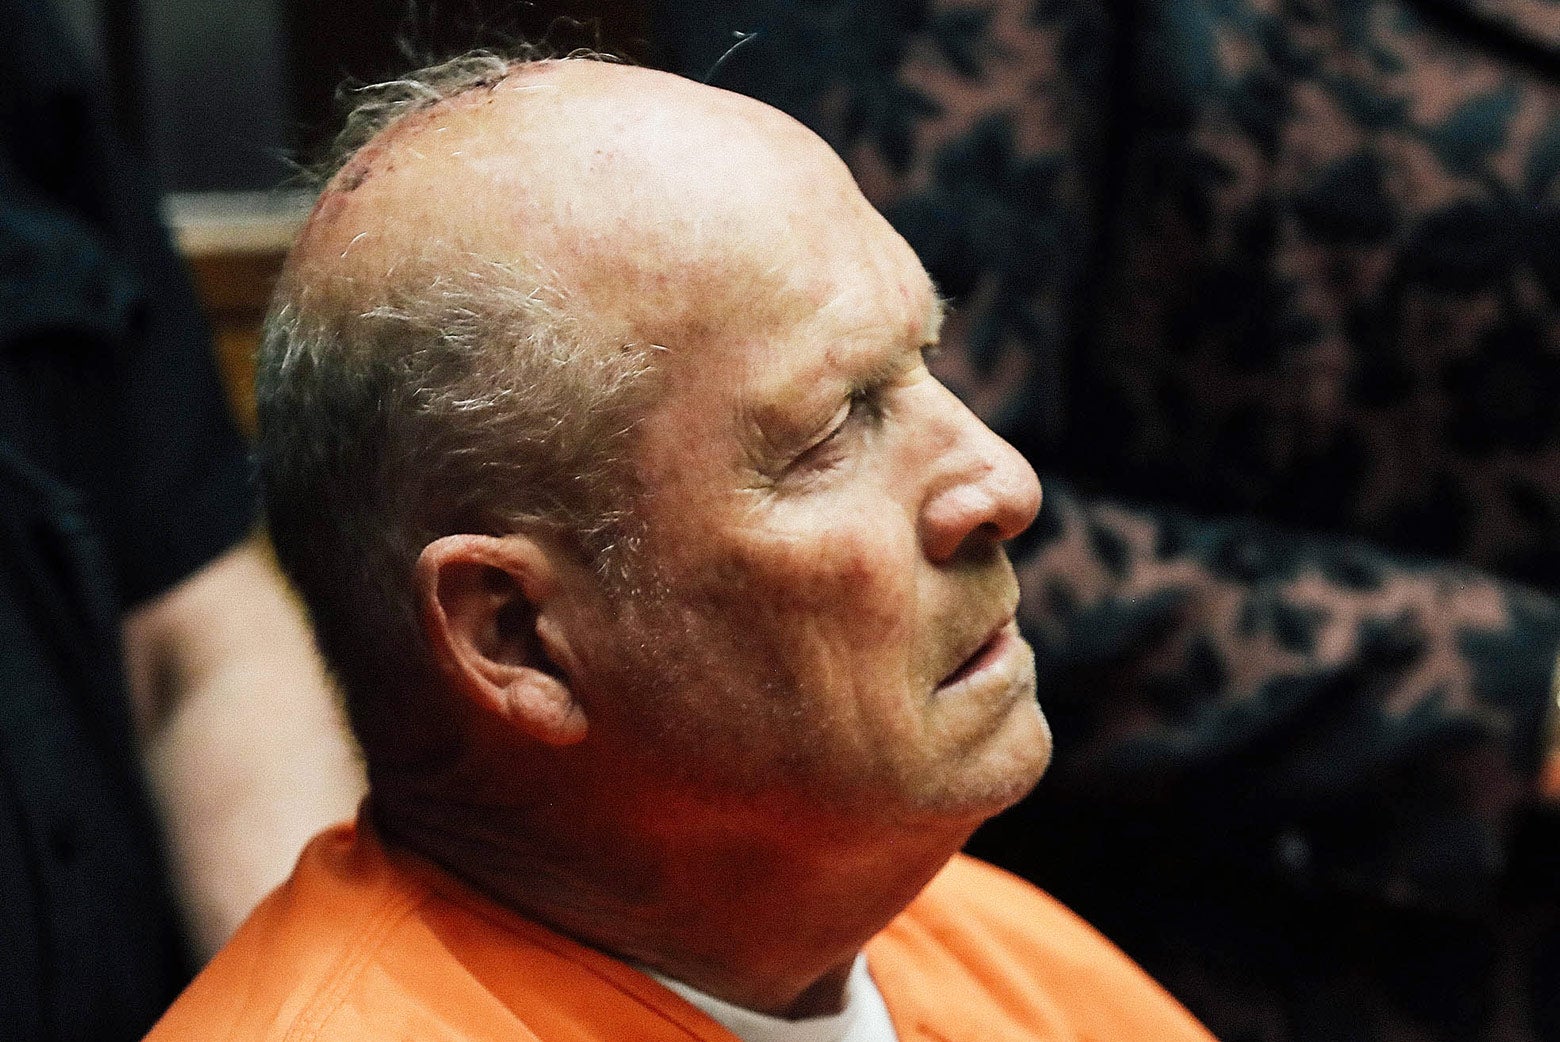 Joseph DeAngelo, the suspected Golden State Killer, appears in court for his arraignment on April 27 in Sacramento, California. 